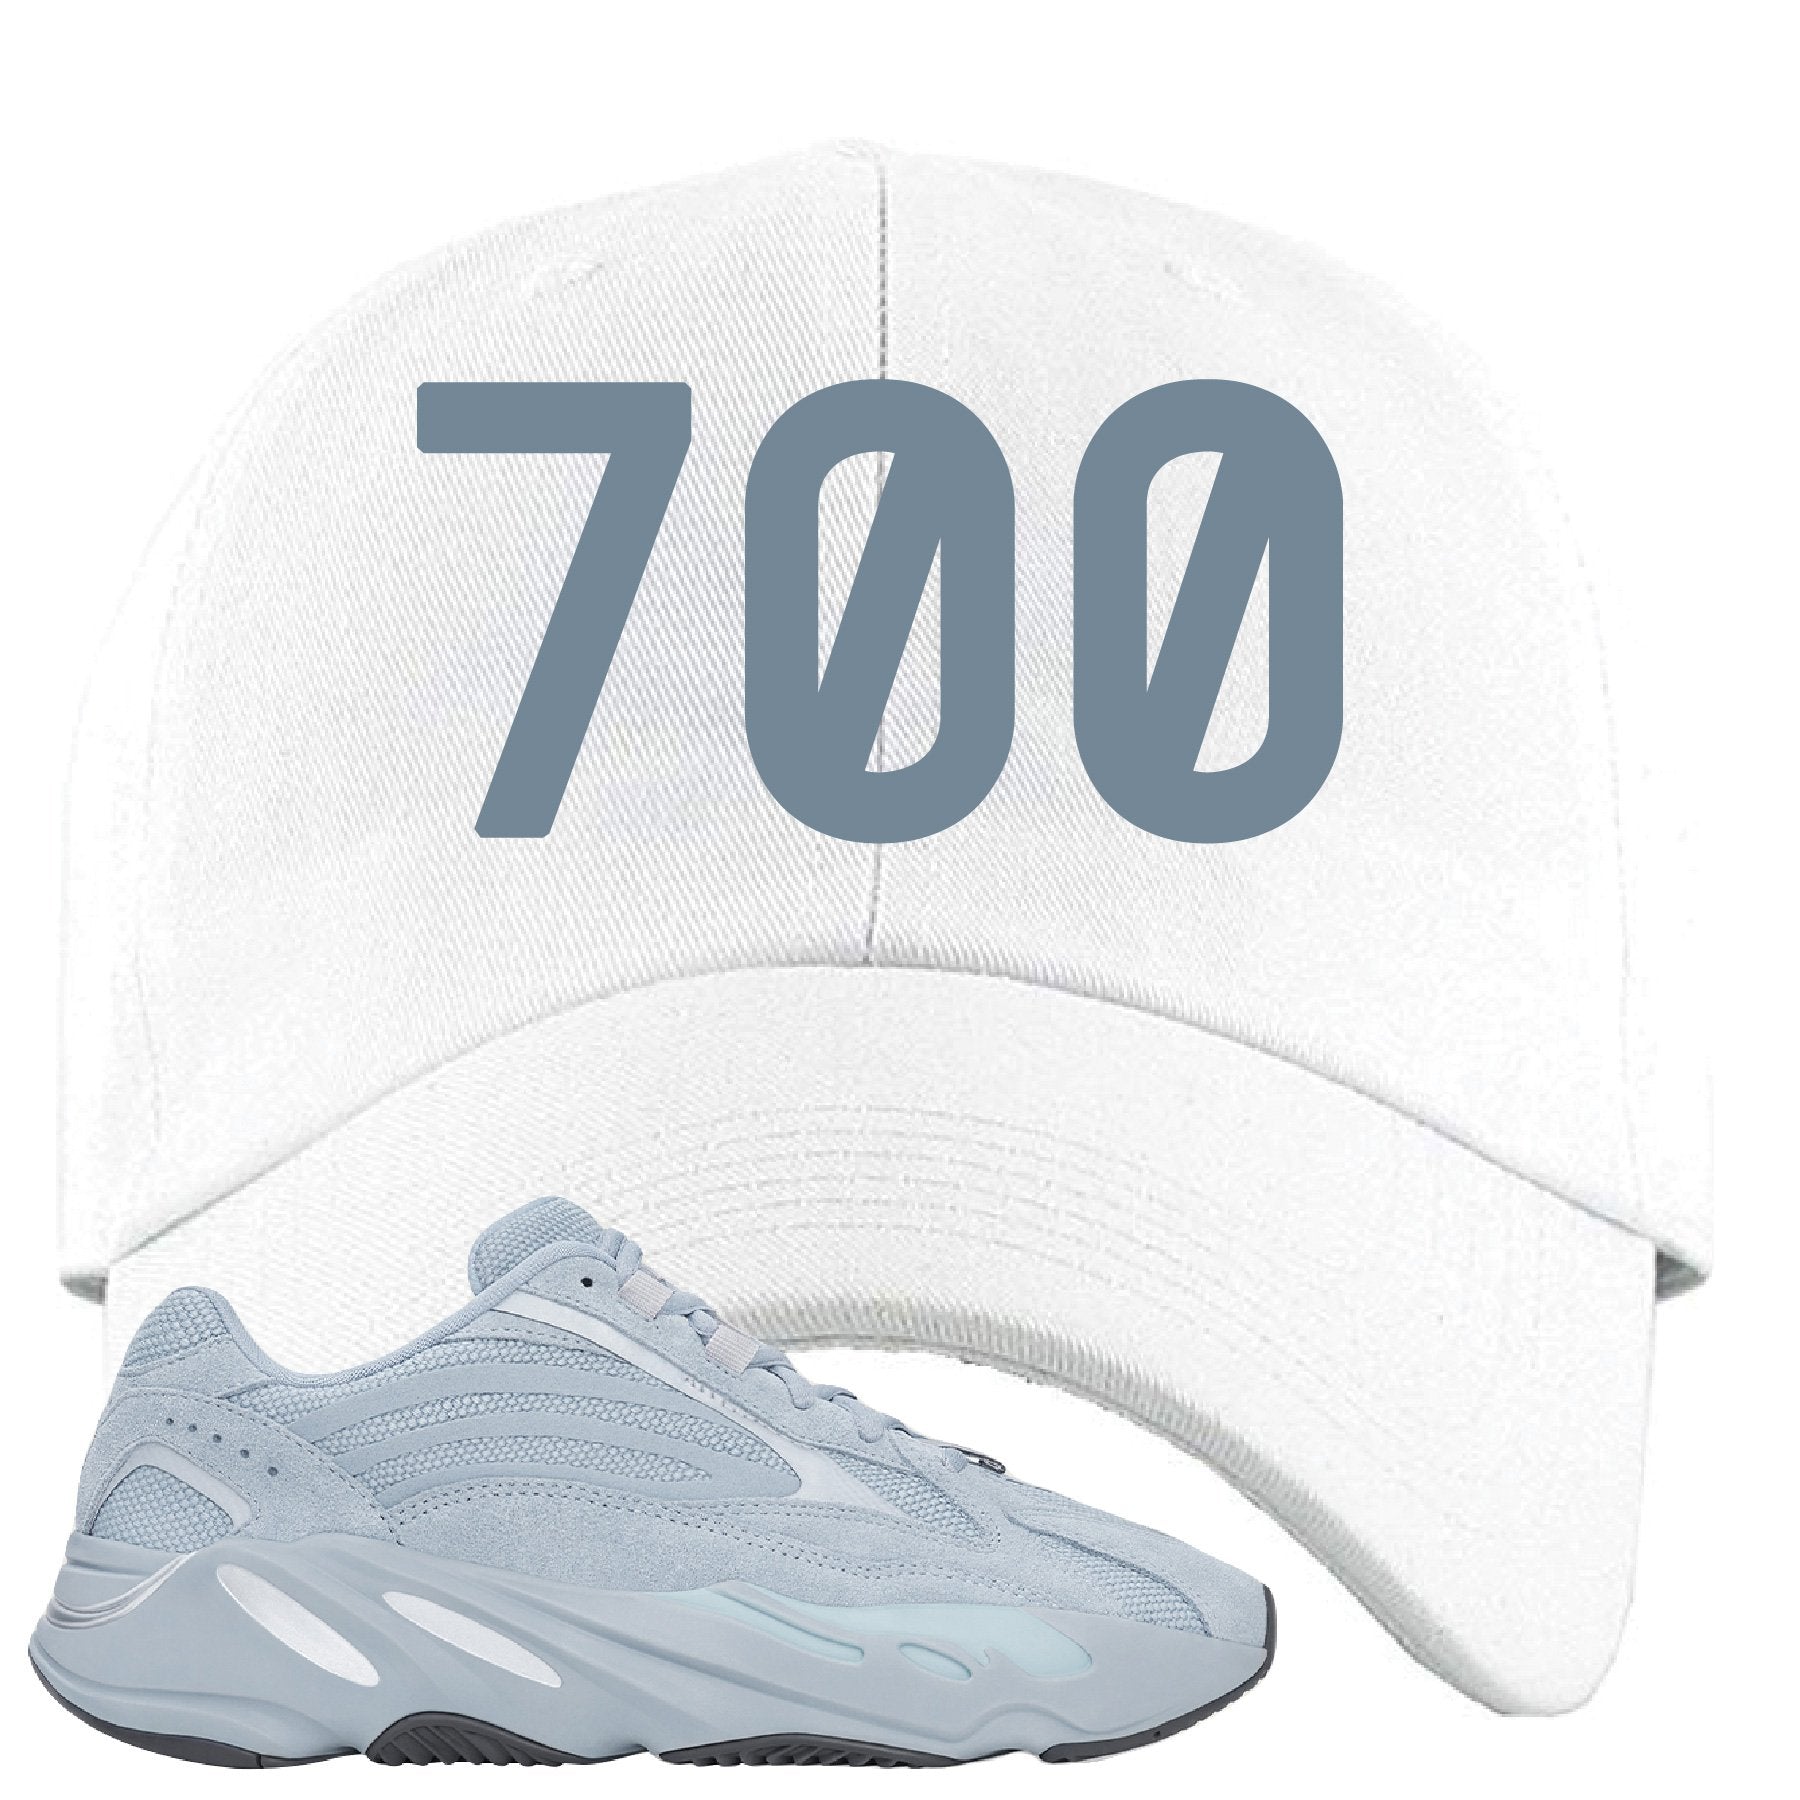 Yeezy Boost 700 V2 Hospital Blue 700 Sneaker Matching White Dad Hat